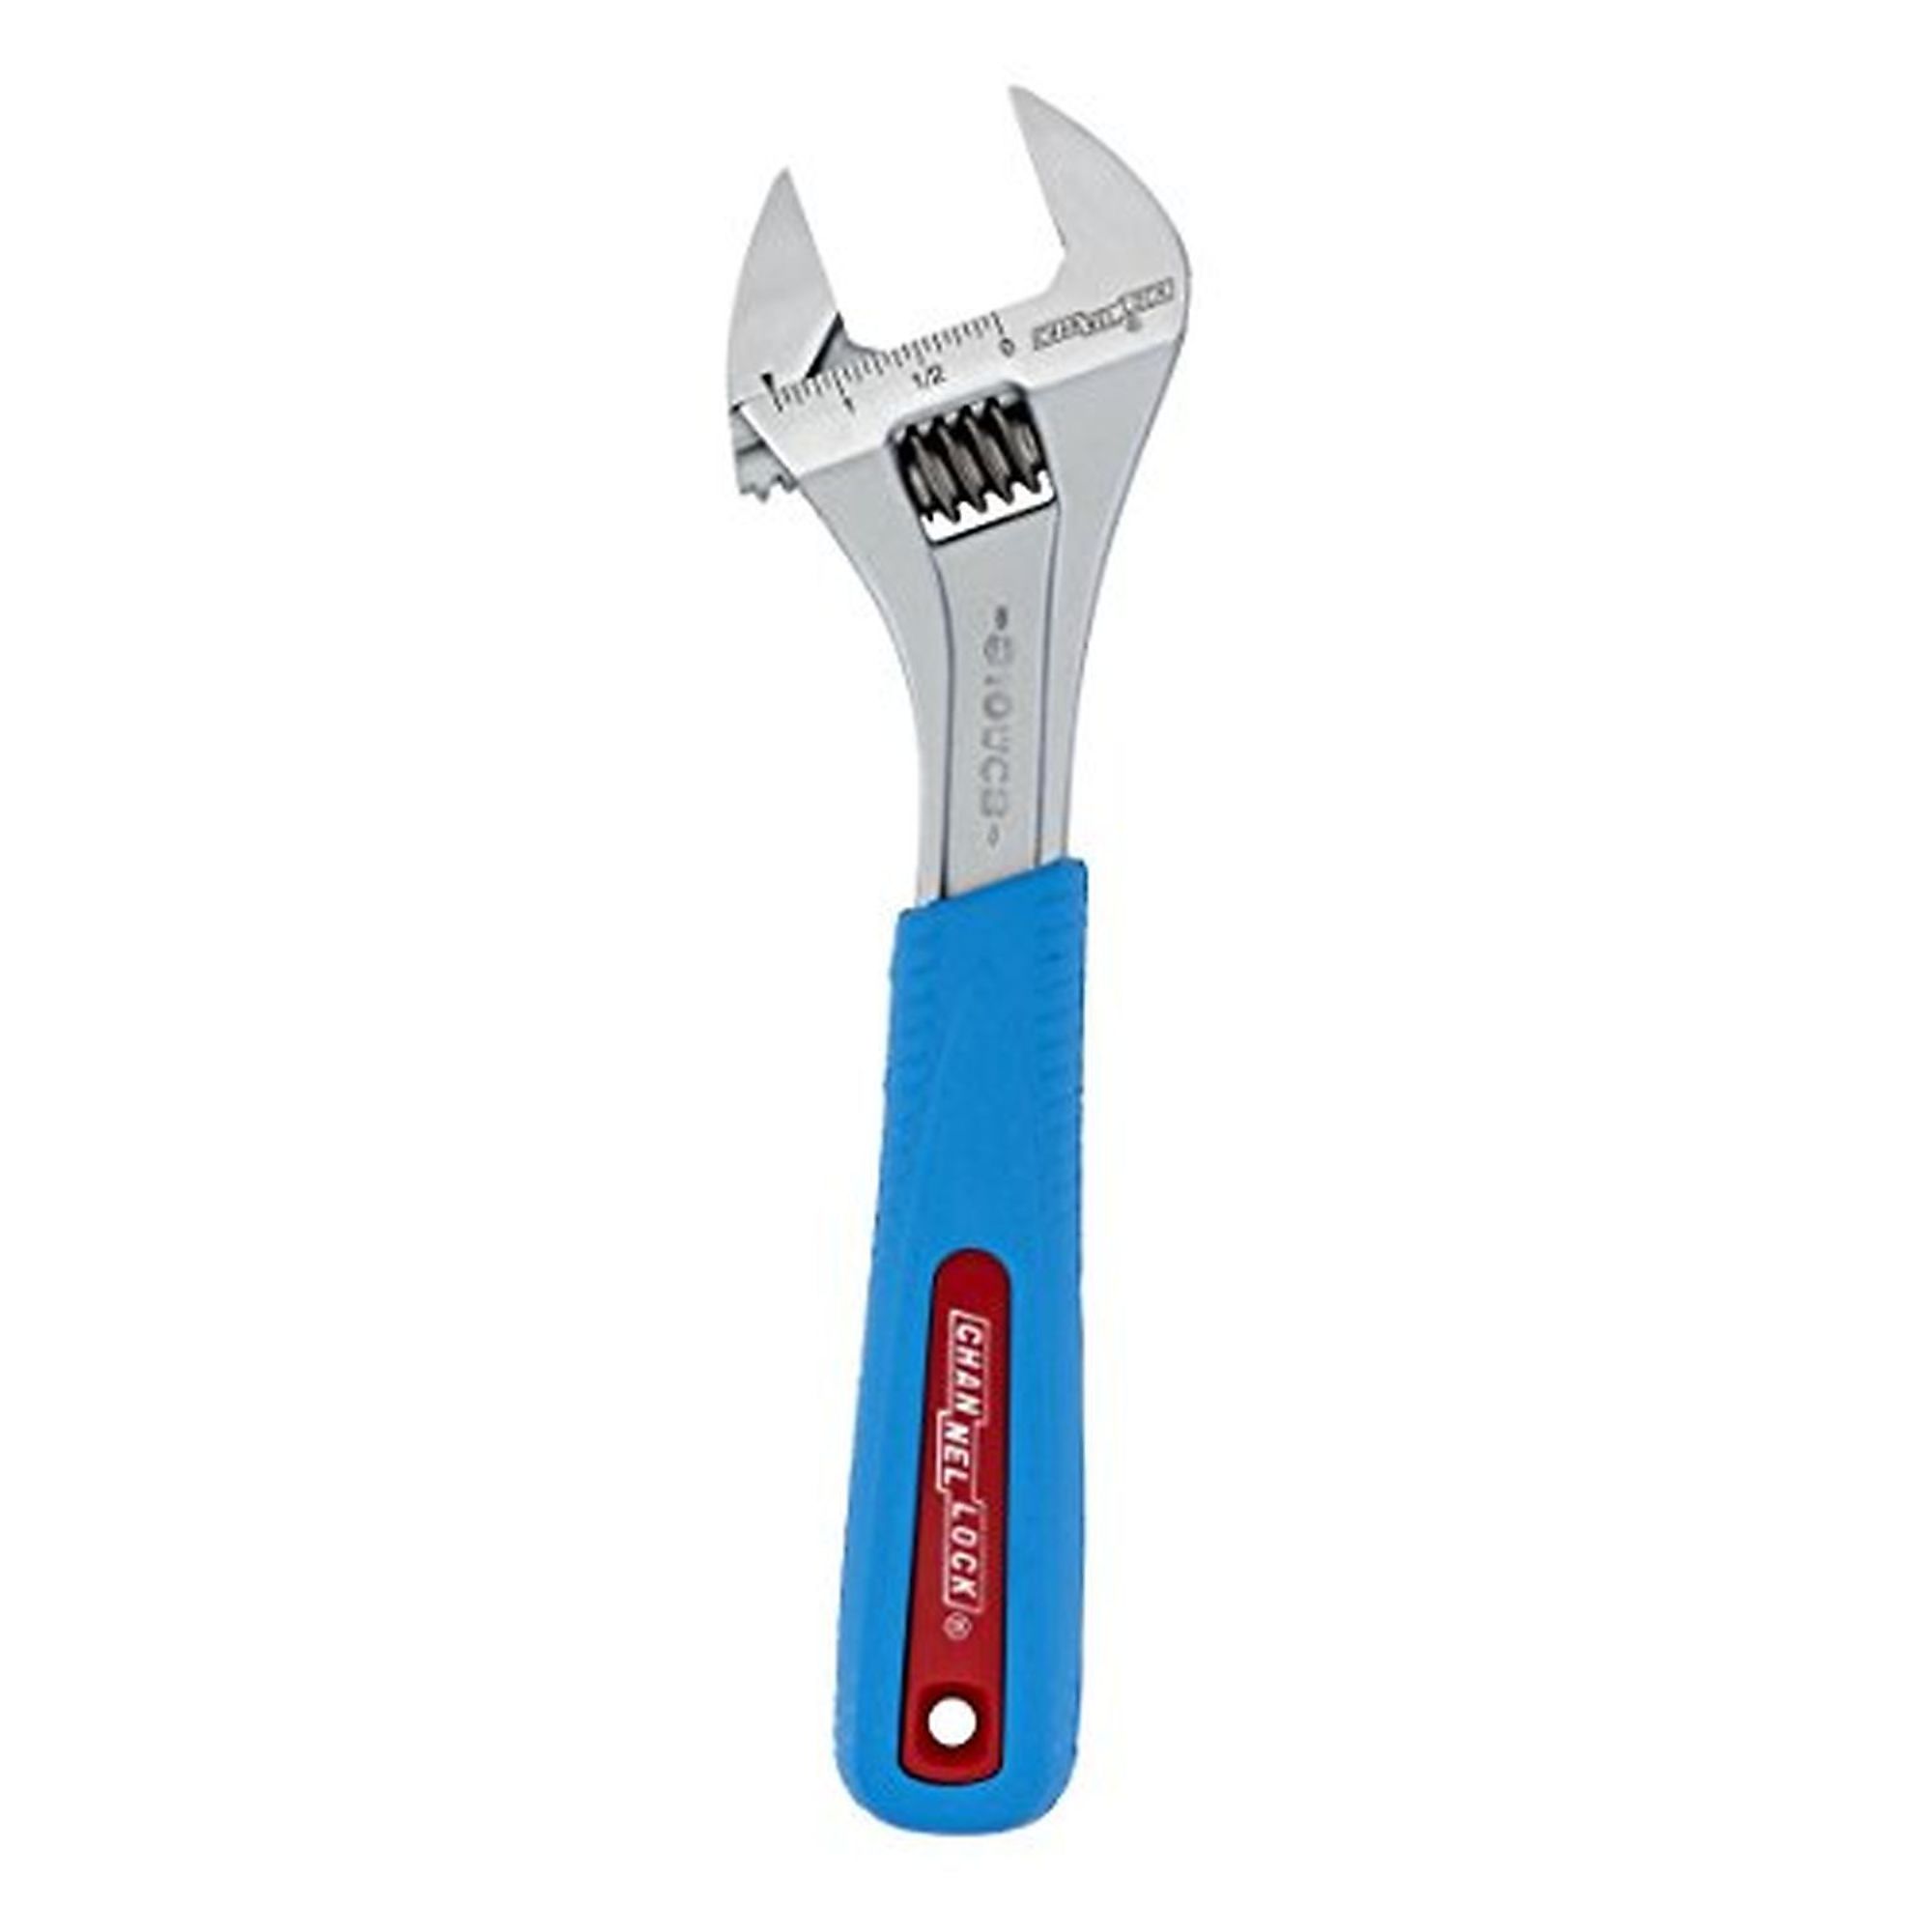 10Inch Adjustable Wrench, Pieces (qty.) 1, Tool Length 10 in, Measurement Standard Standard (SAE), Model - Channellock 810WCB